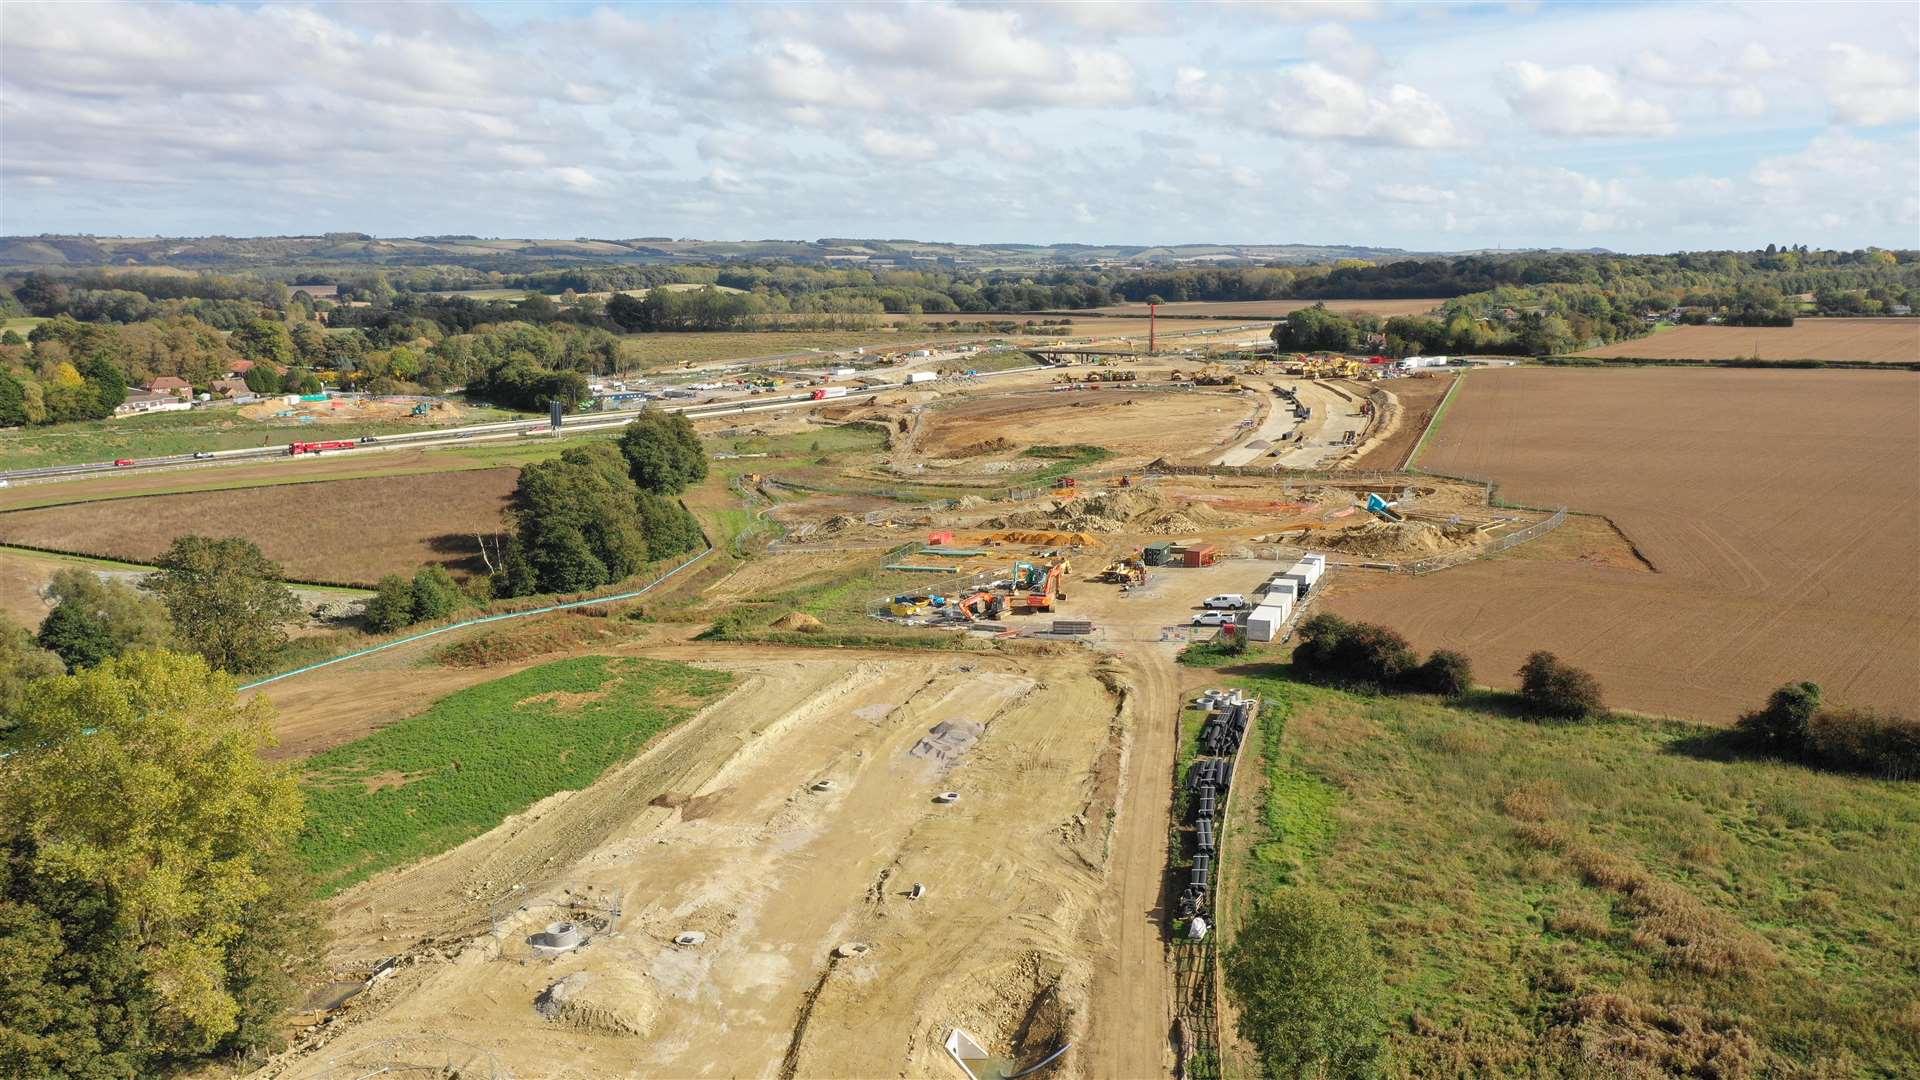 The new link road is being built. Picture: Vantage Photography / info@vantage-photography.co.uk